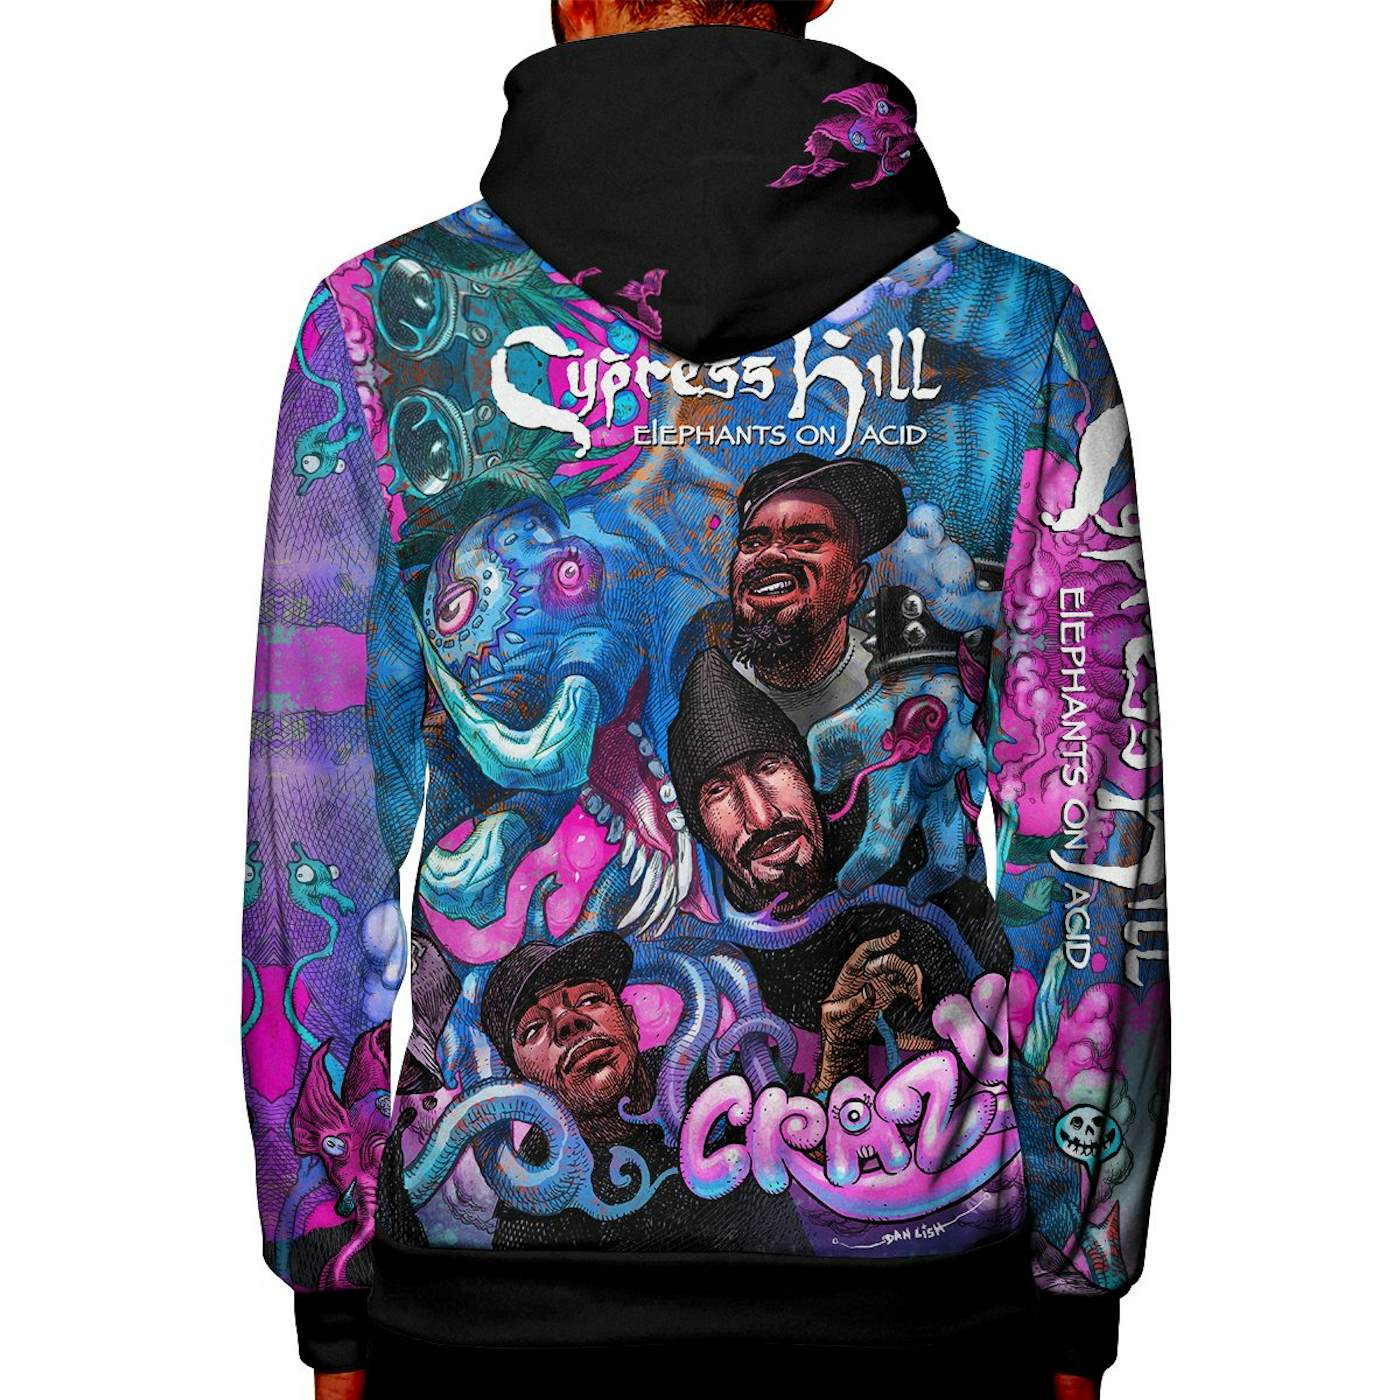 Print On Demand All-Over Print Zip-Up Hoodies with Automated